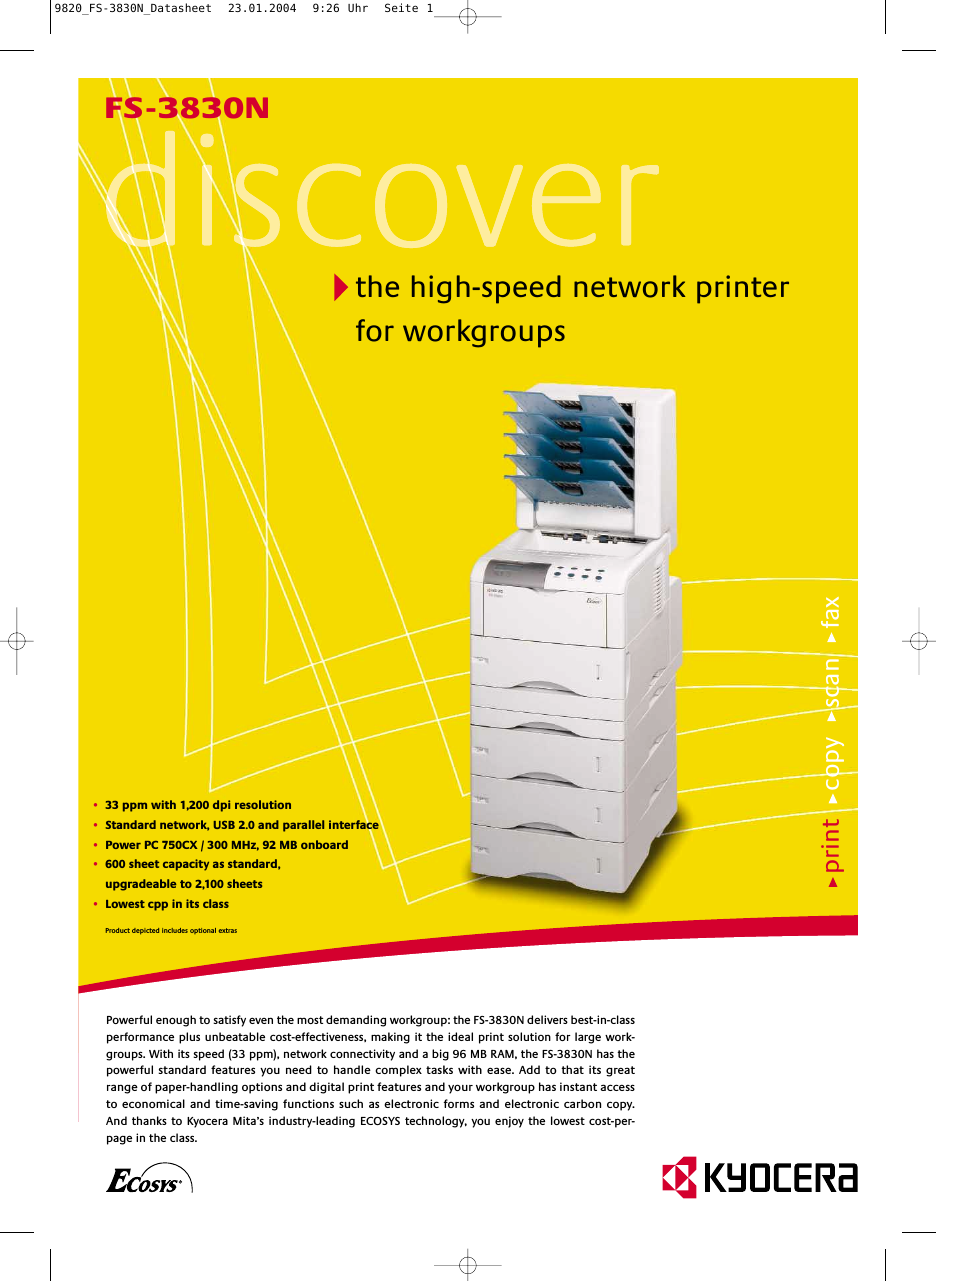 DISCOVER FS-3830N (Page 1)